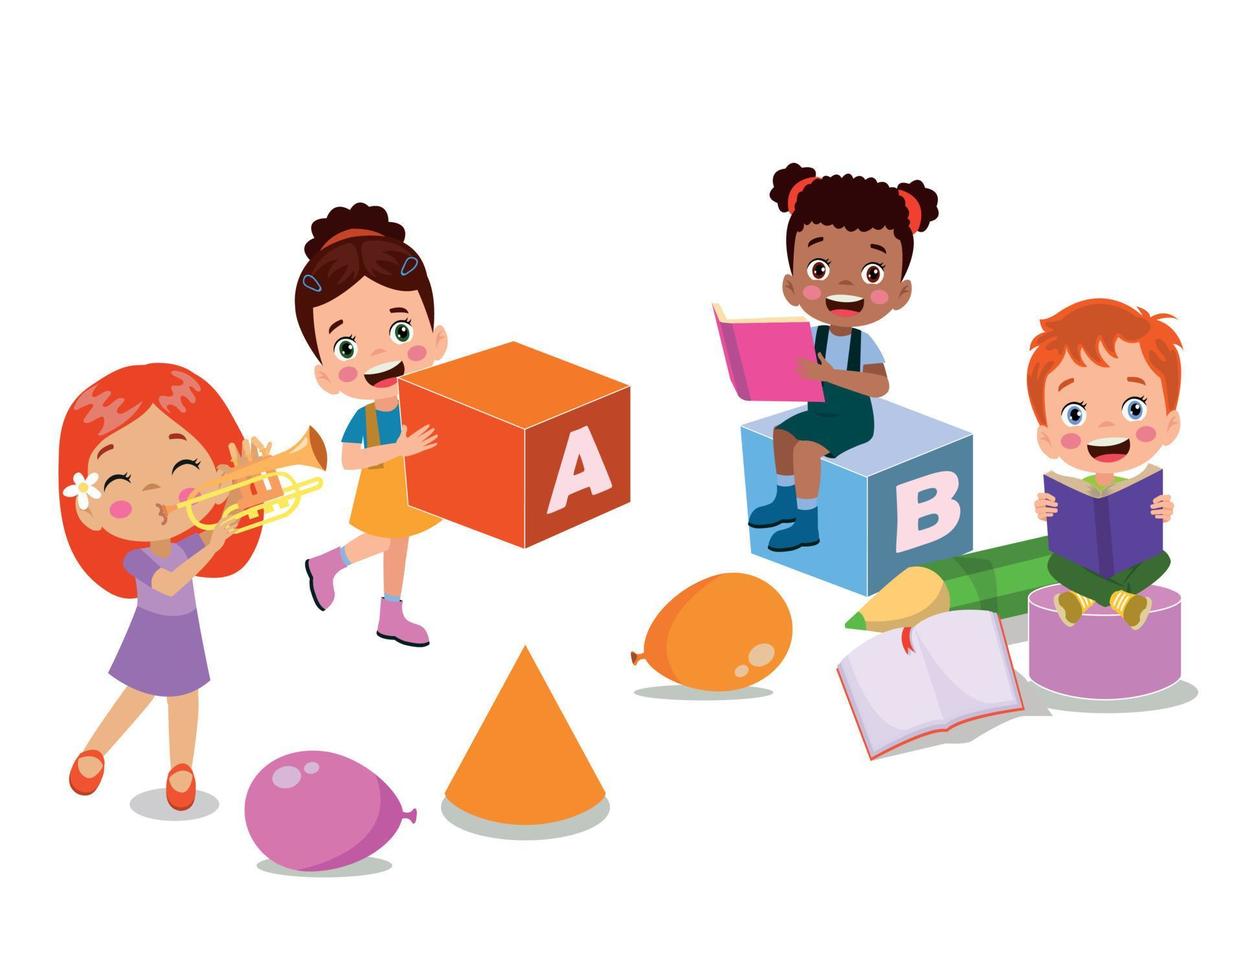 Vector illustration of cute kids with Abc blocks, abc letters